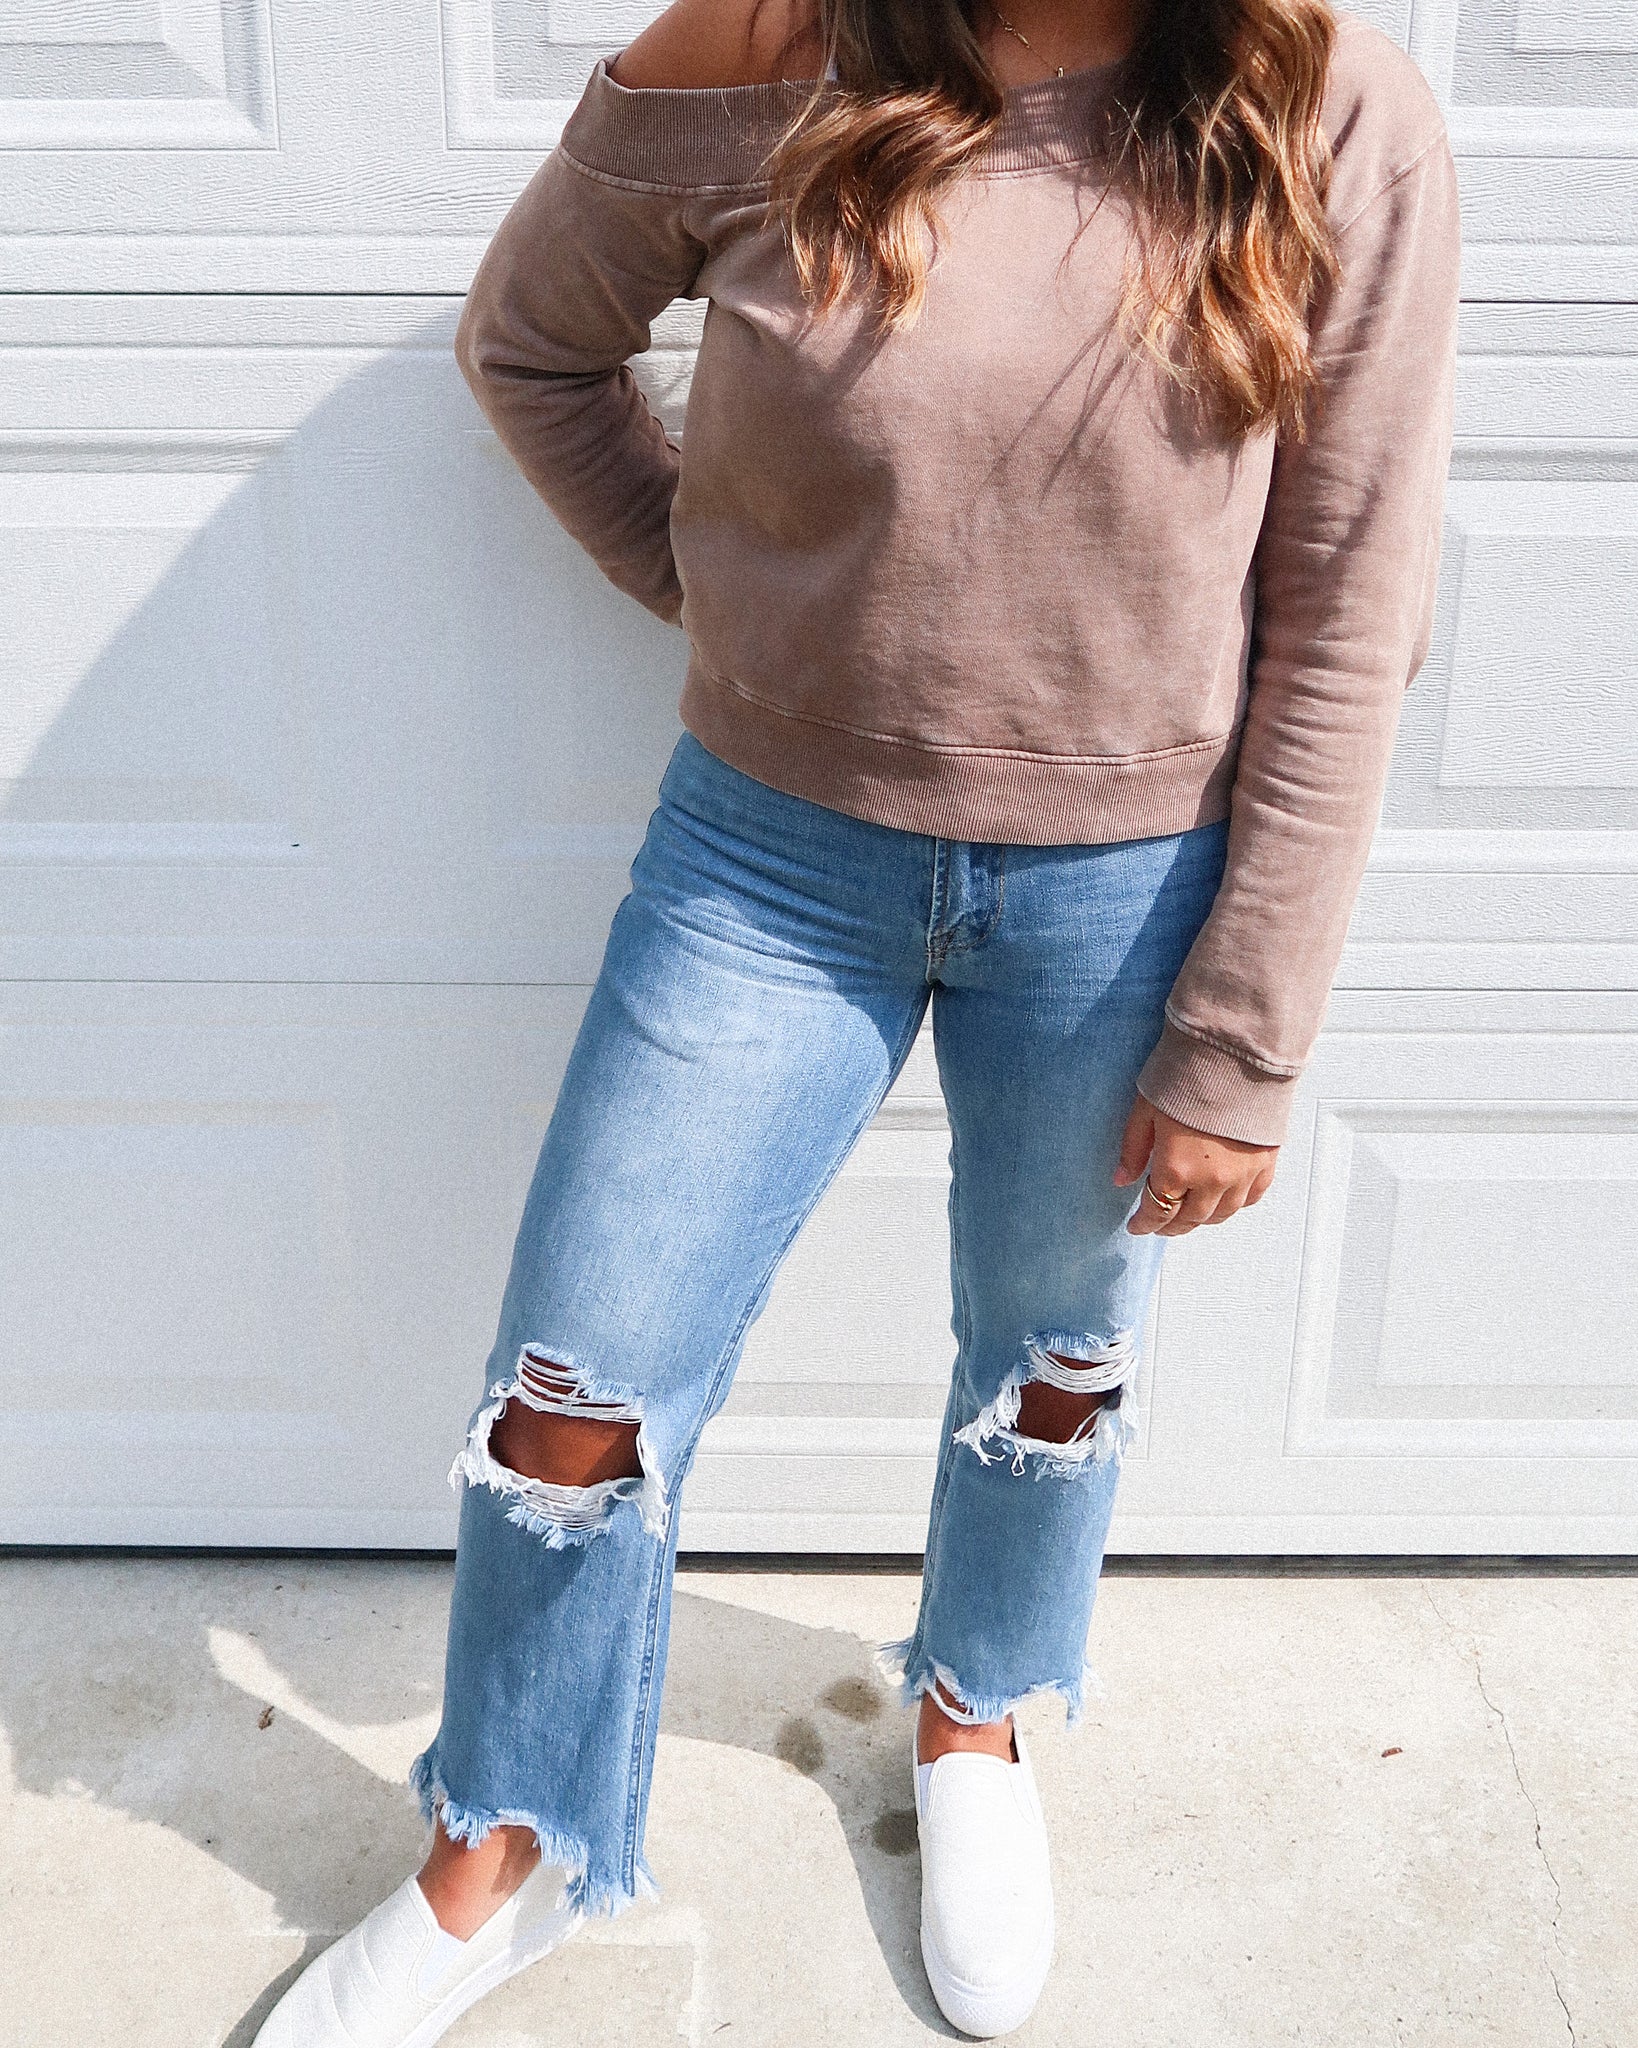 Mabel Straight Jeans